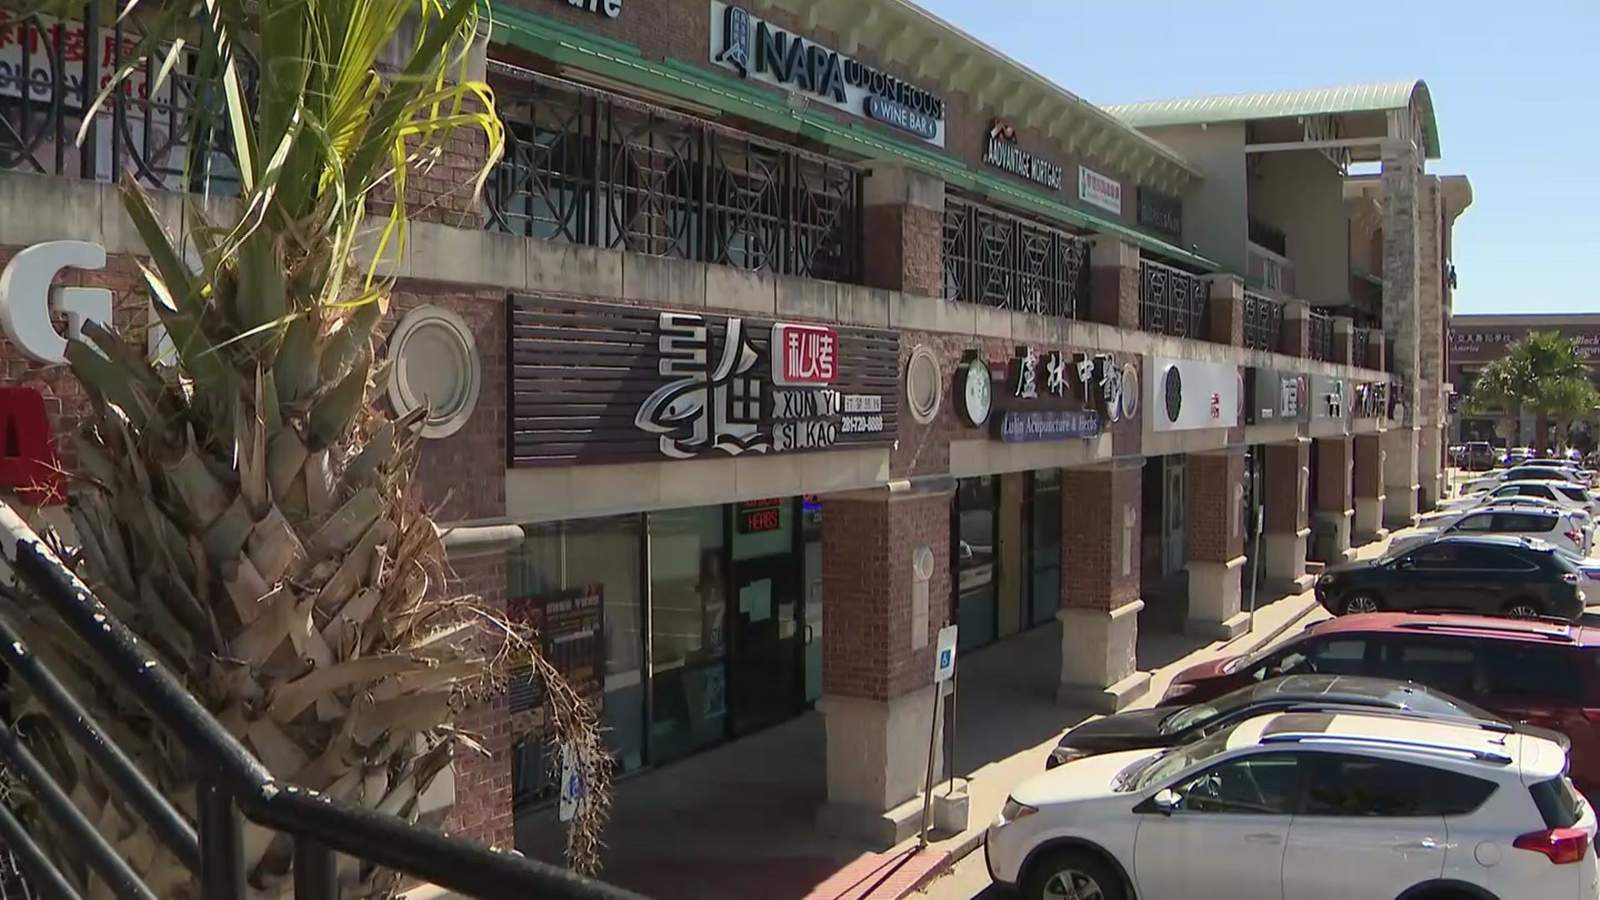 'Very challenging’: Chinatown businesses are losing customers due to coronavirus rumors, owners say